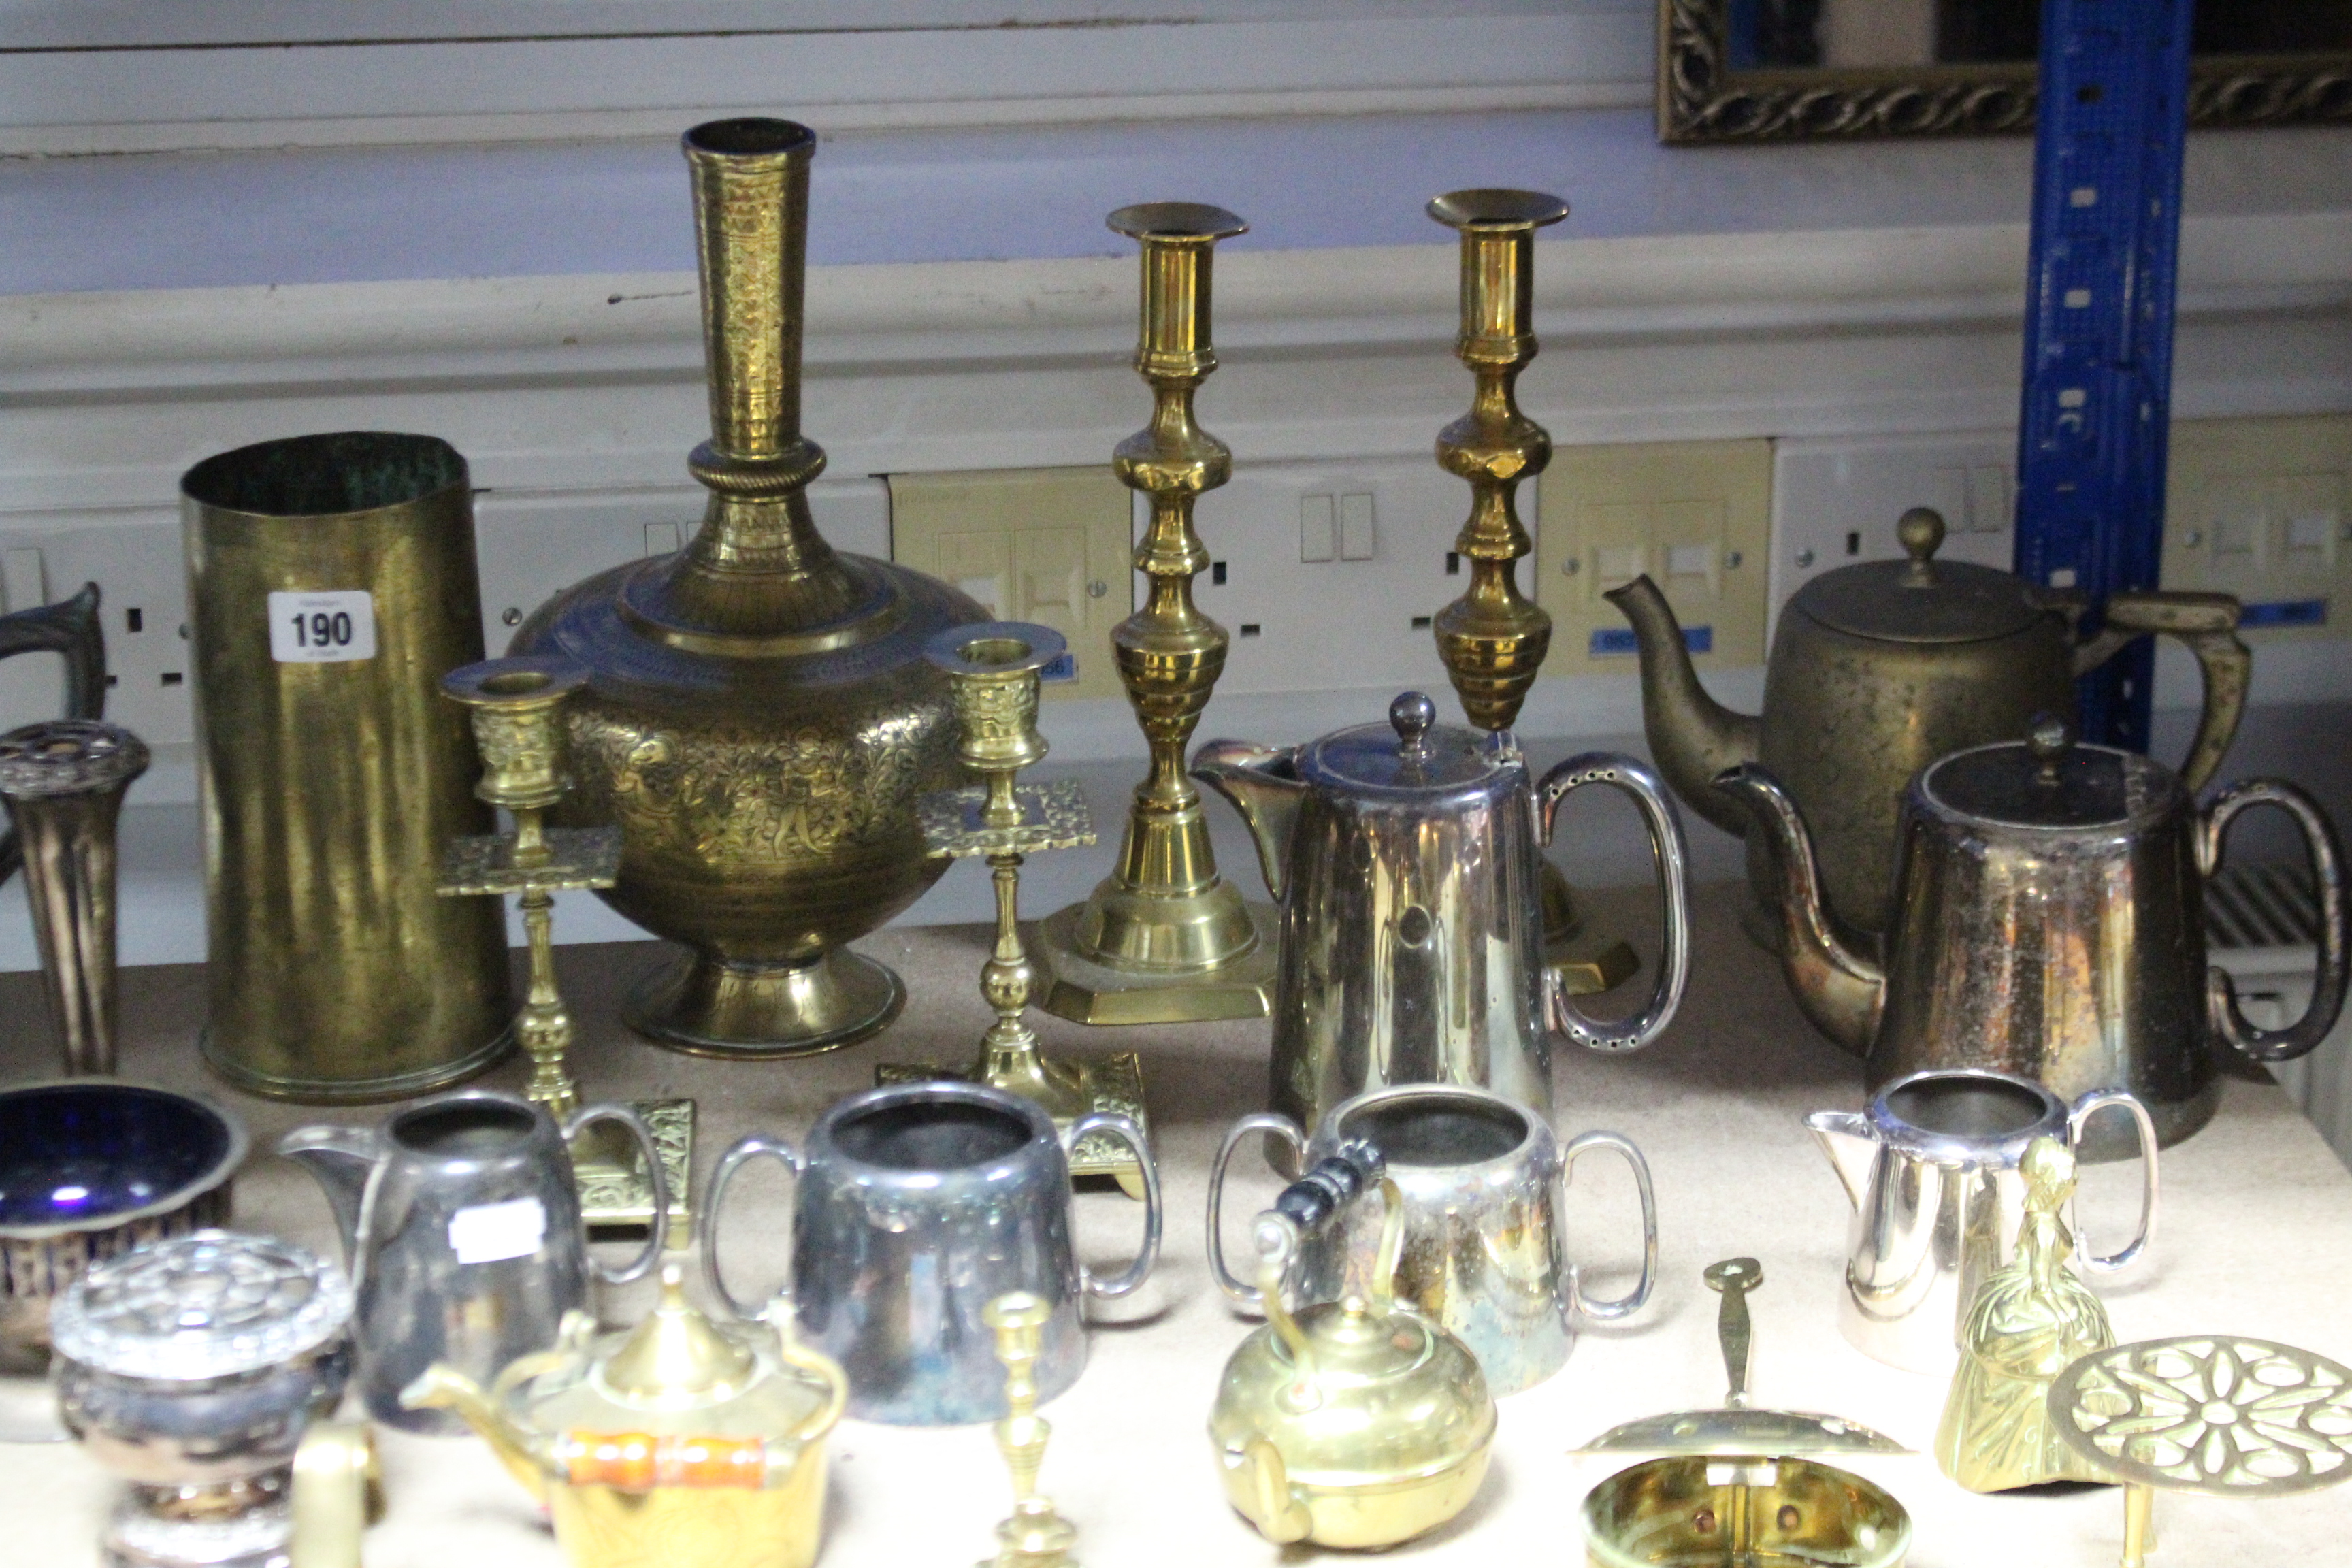 Two pairs of brass candlesticks, 10”, & 6” high; & various other items of metalware & plated ware. - Image 2 of 4